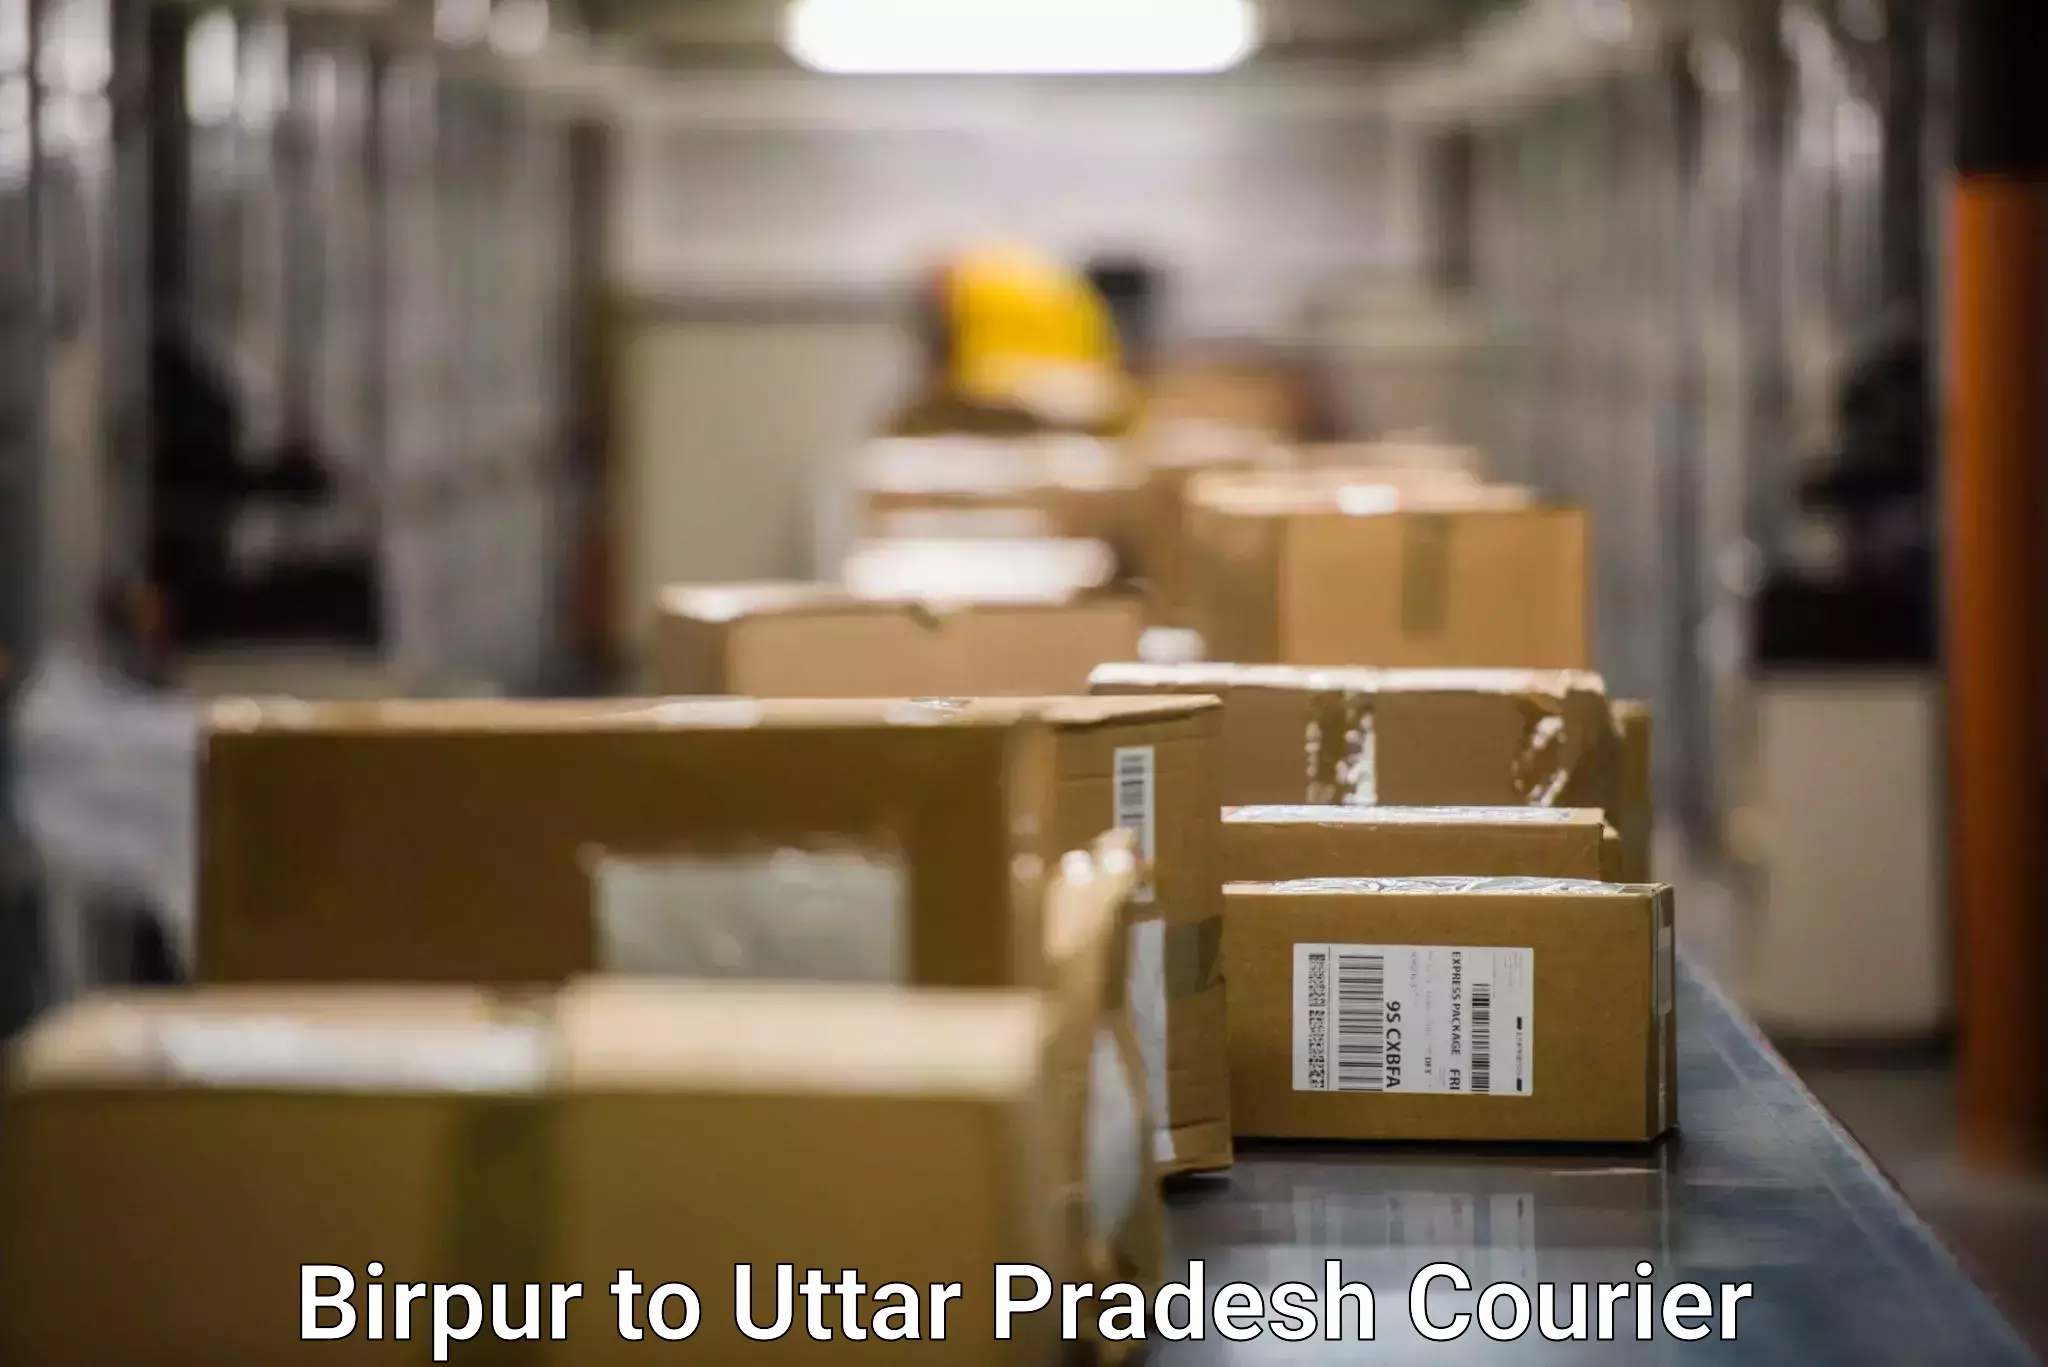 Parcel delivery automation Birpur to Aligarh Muslim University